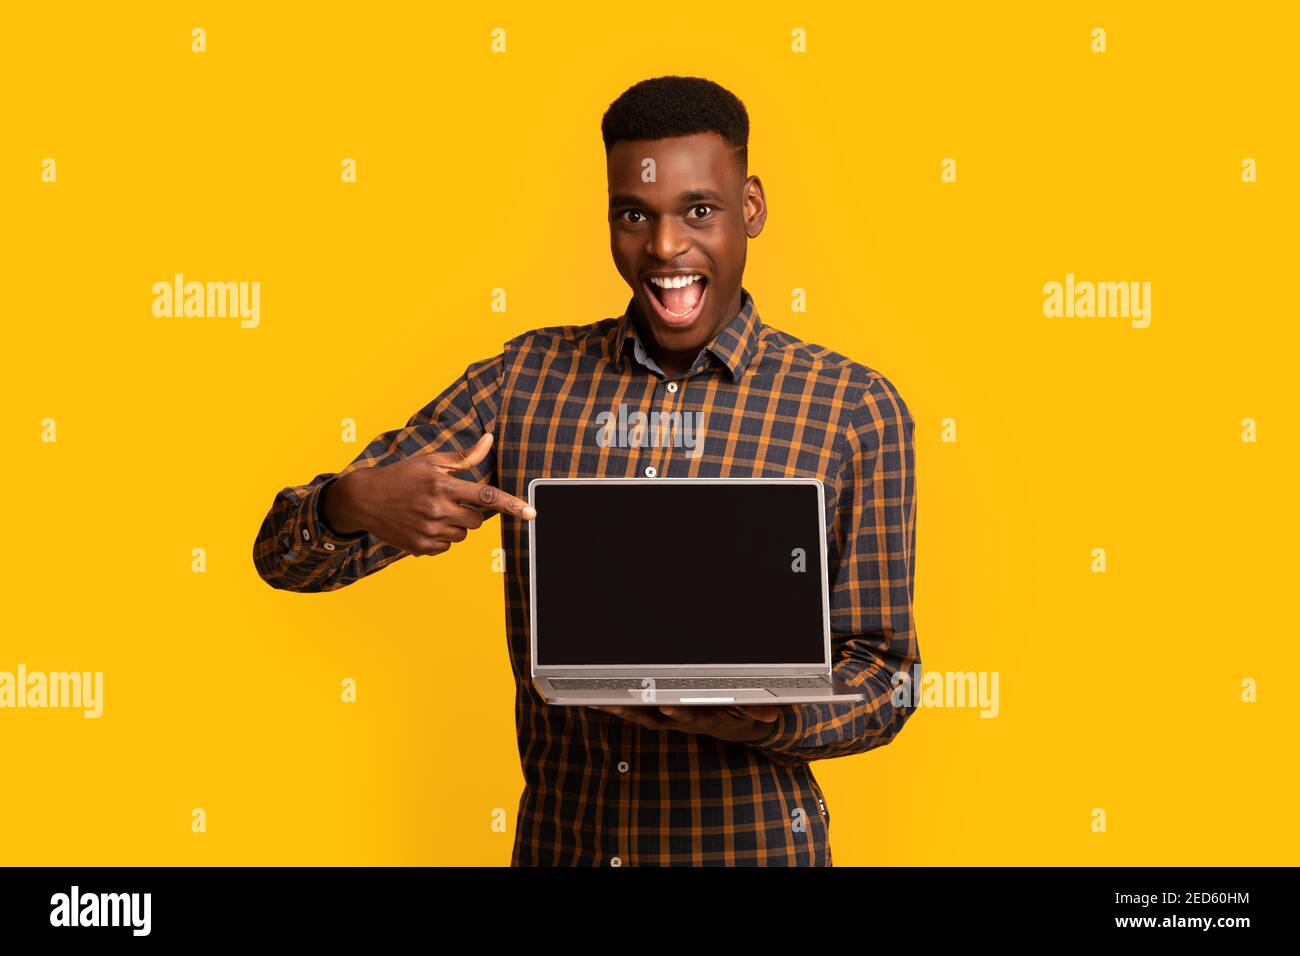 Check This Website. African Guy Pointing At Laptop Computer With Black Screen Stock Photo